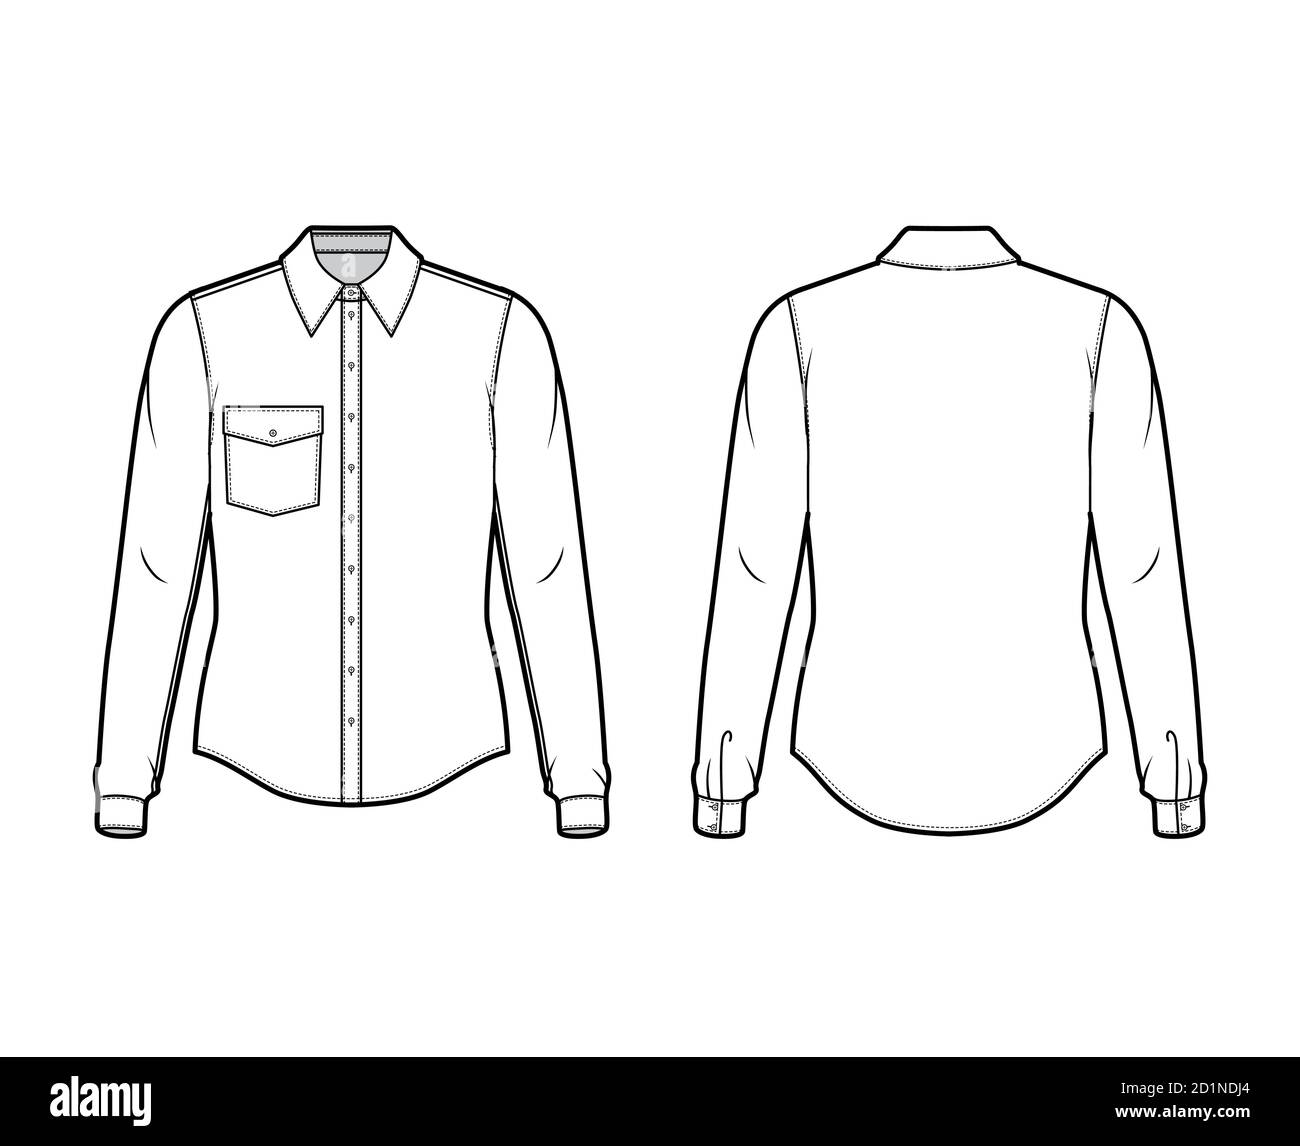 Classic shirt technical fashion illustration with long sleeve with cuff ...